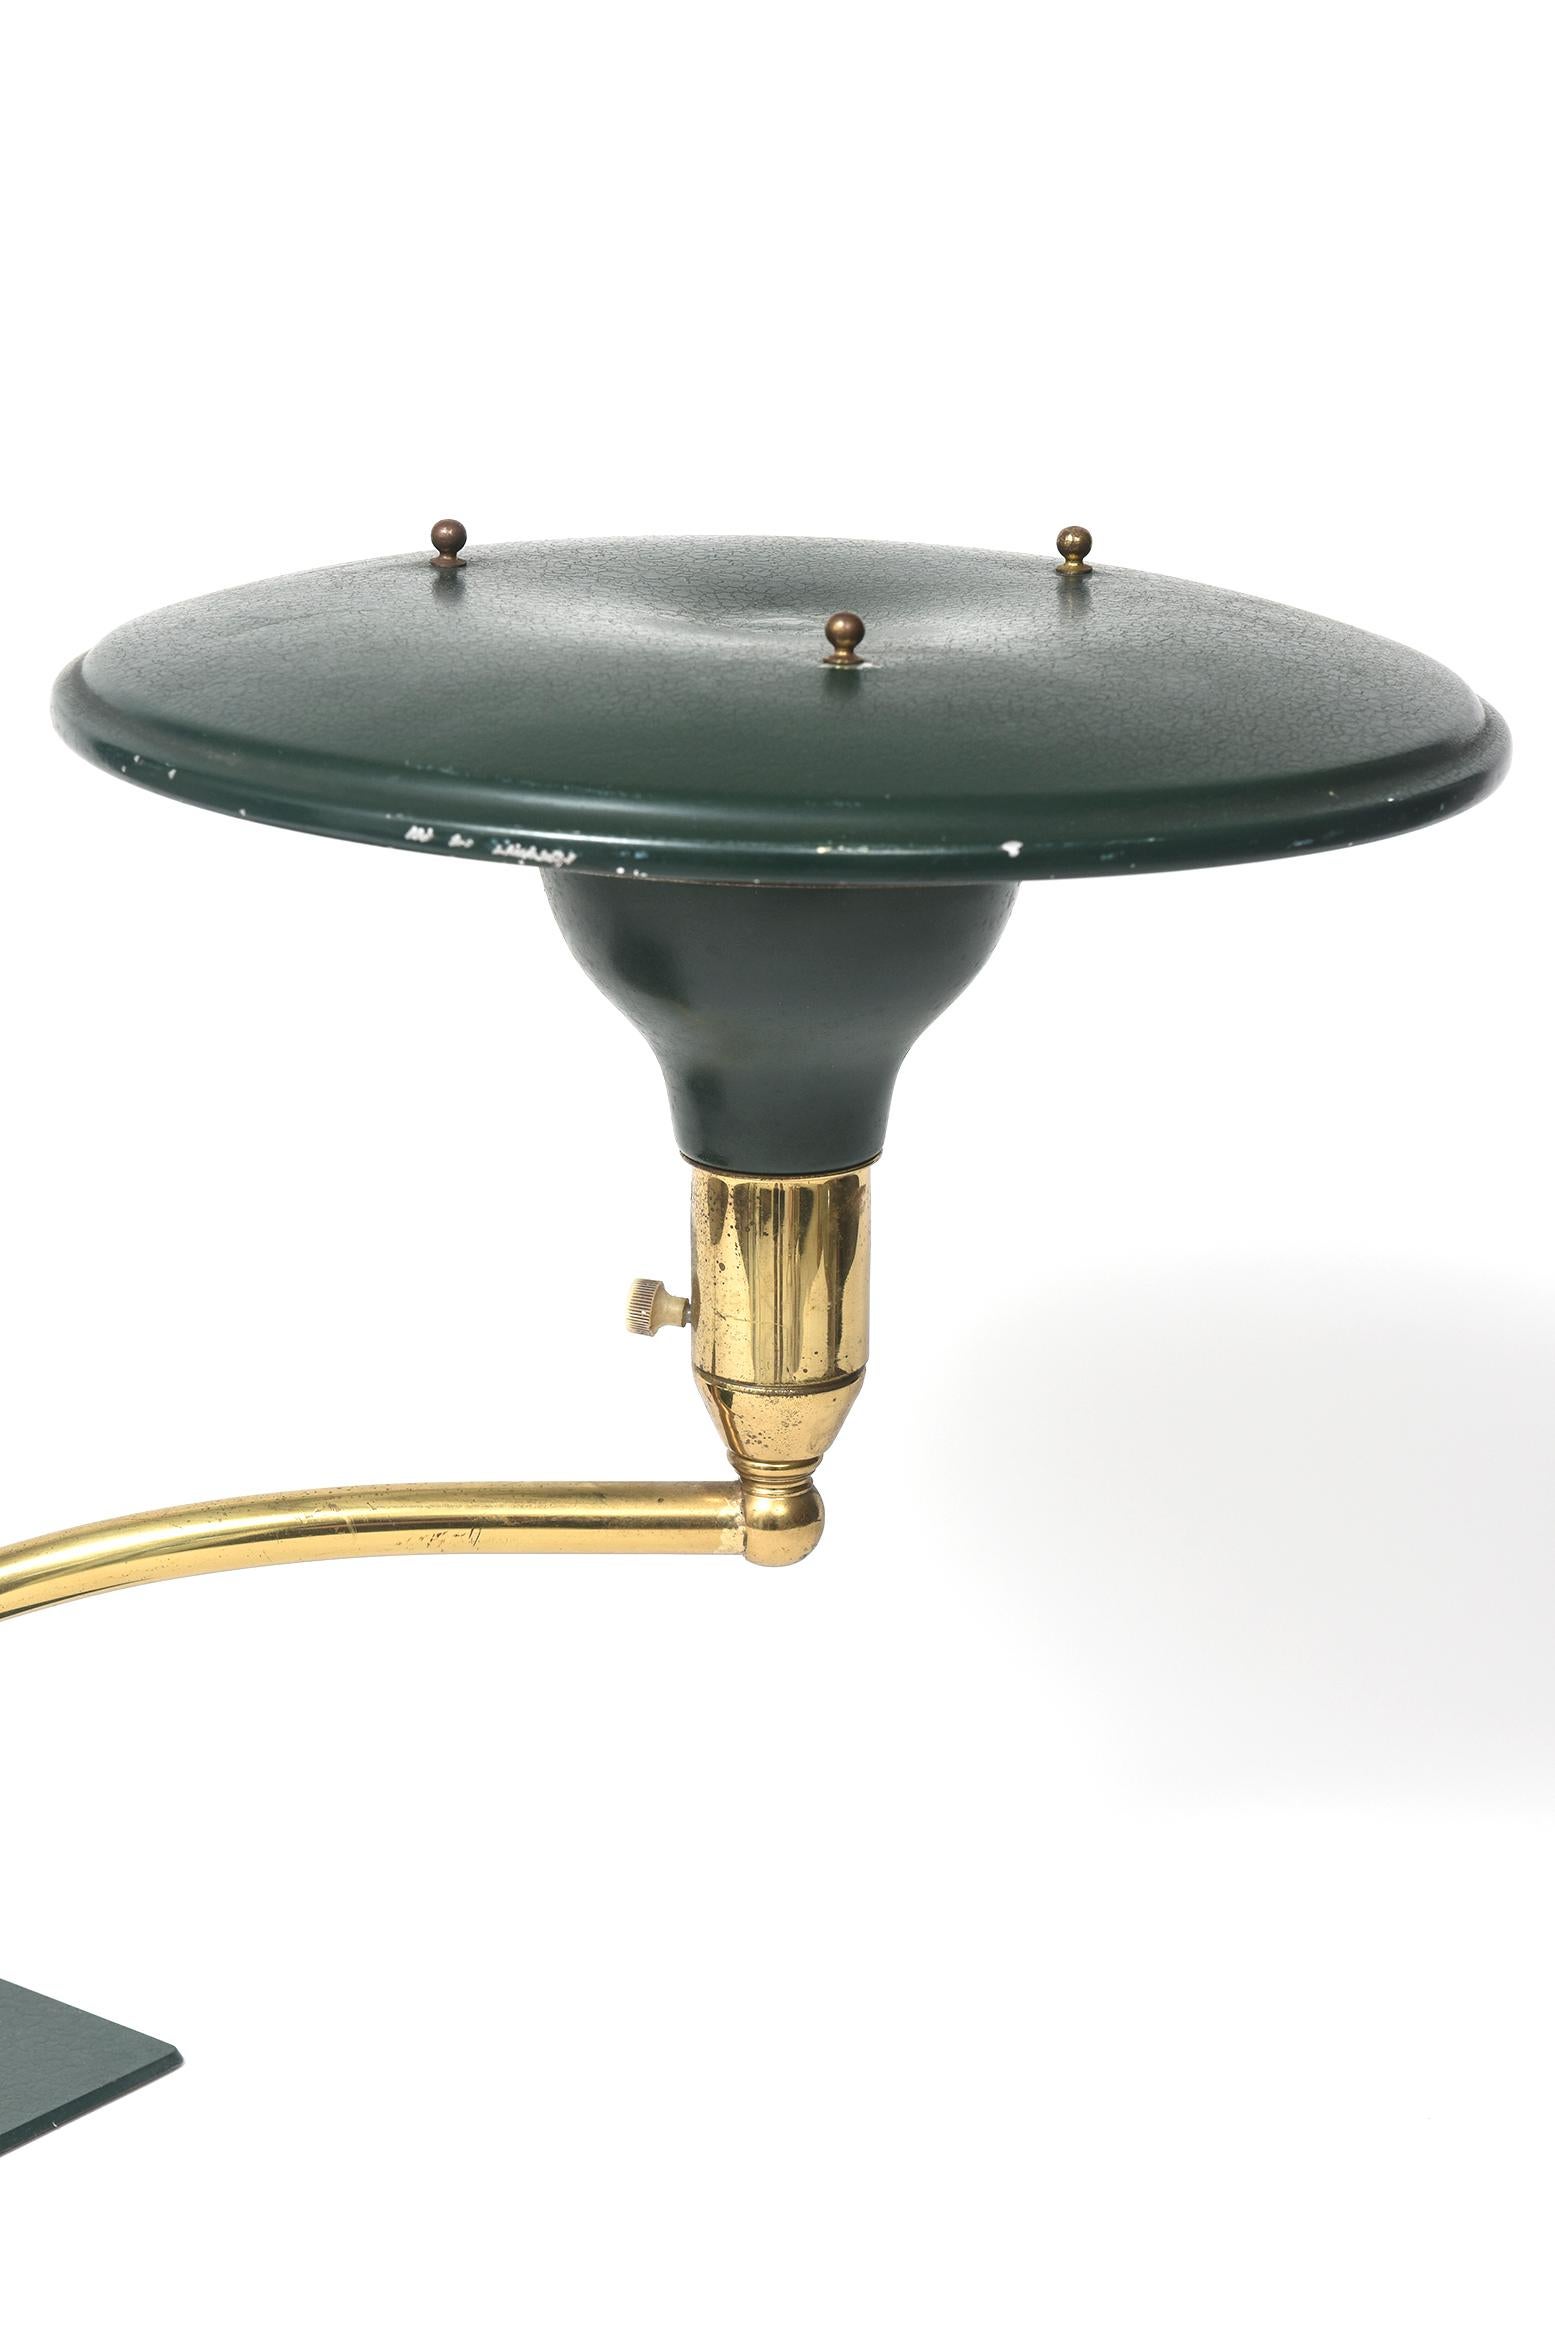 Mid-century wheeler sight light desk lamp Leroy Doane. This is a wonderful Sight Light desk lamp designed by Leroy C. Doane. This lamp reaches out on a brass stem that swivels and has a green metal shade. The base is substantial to support the